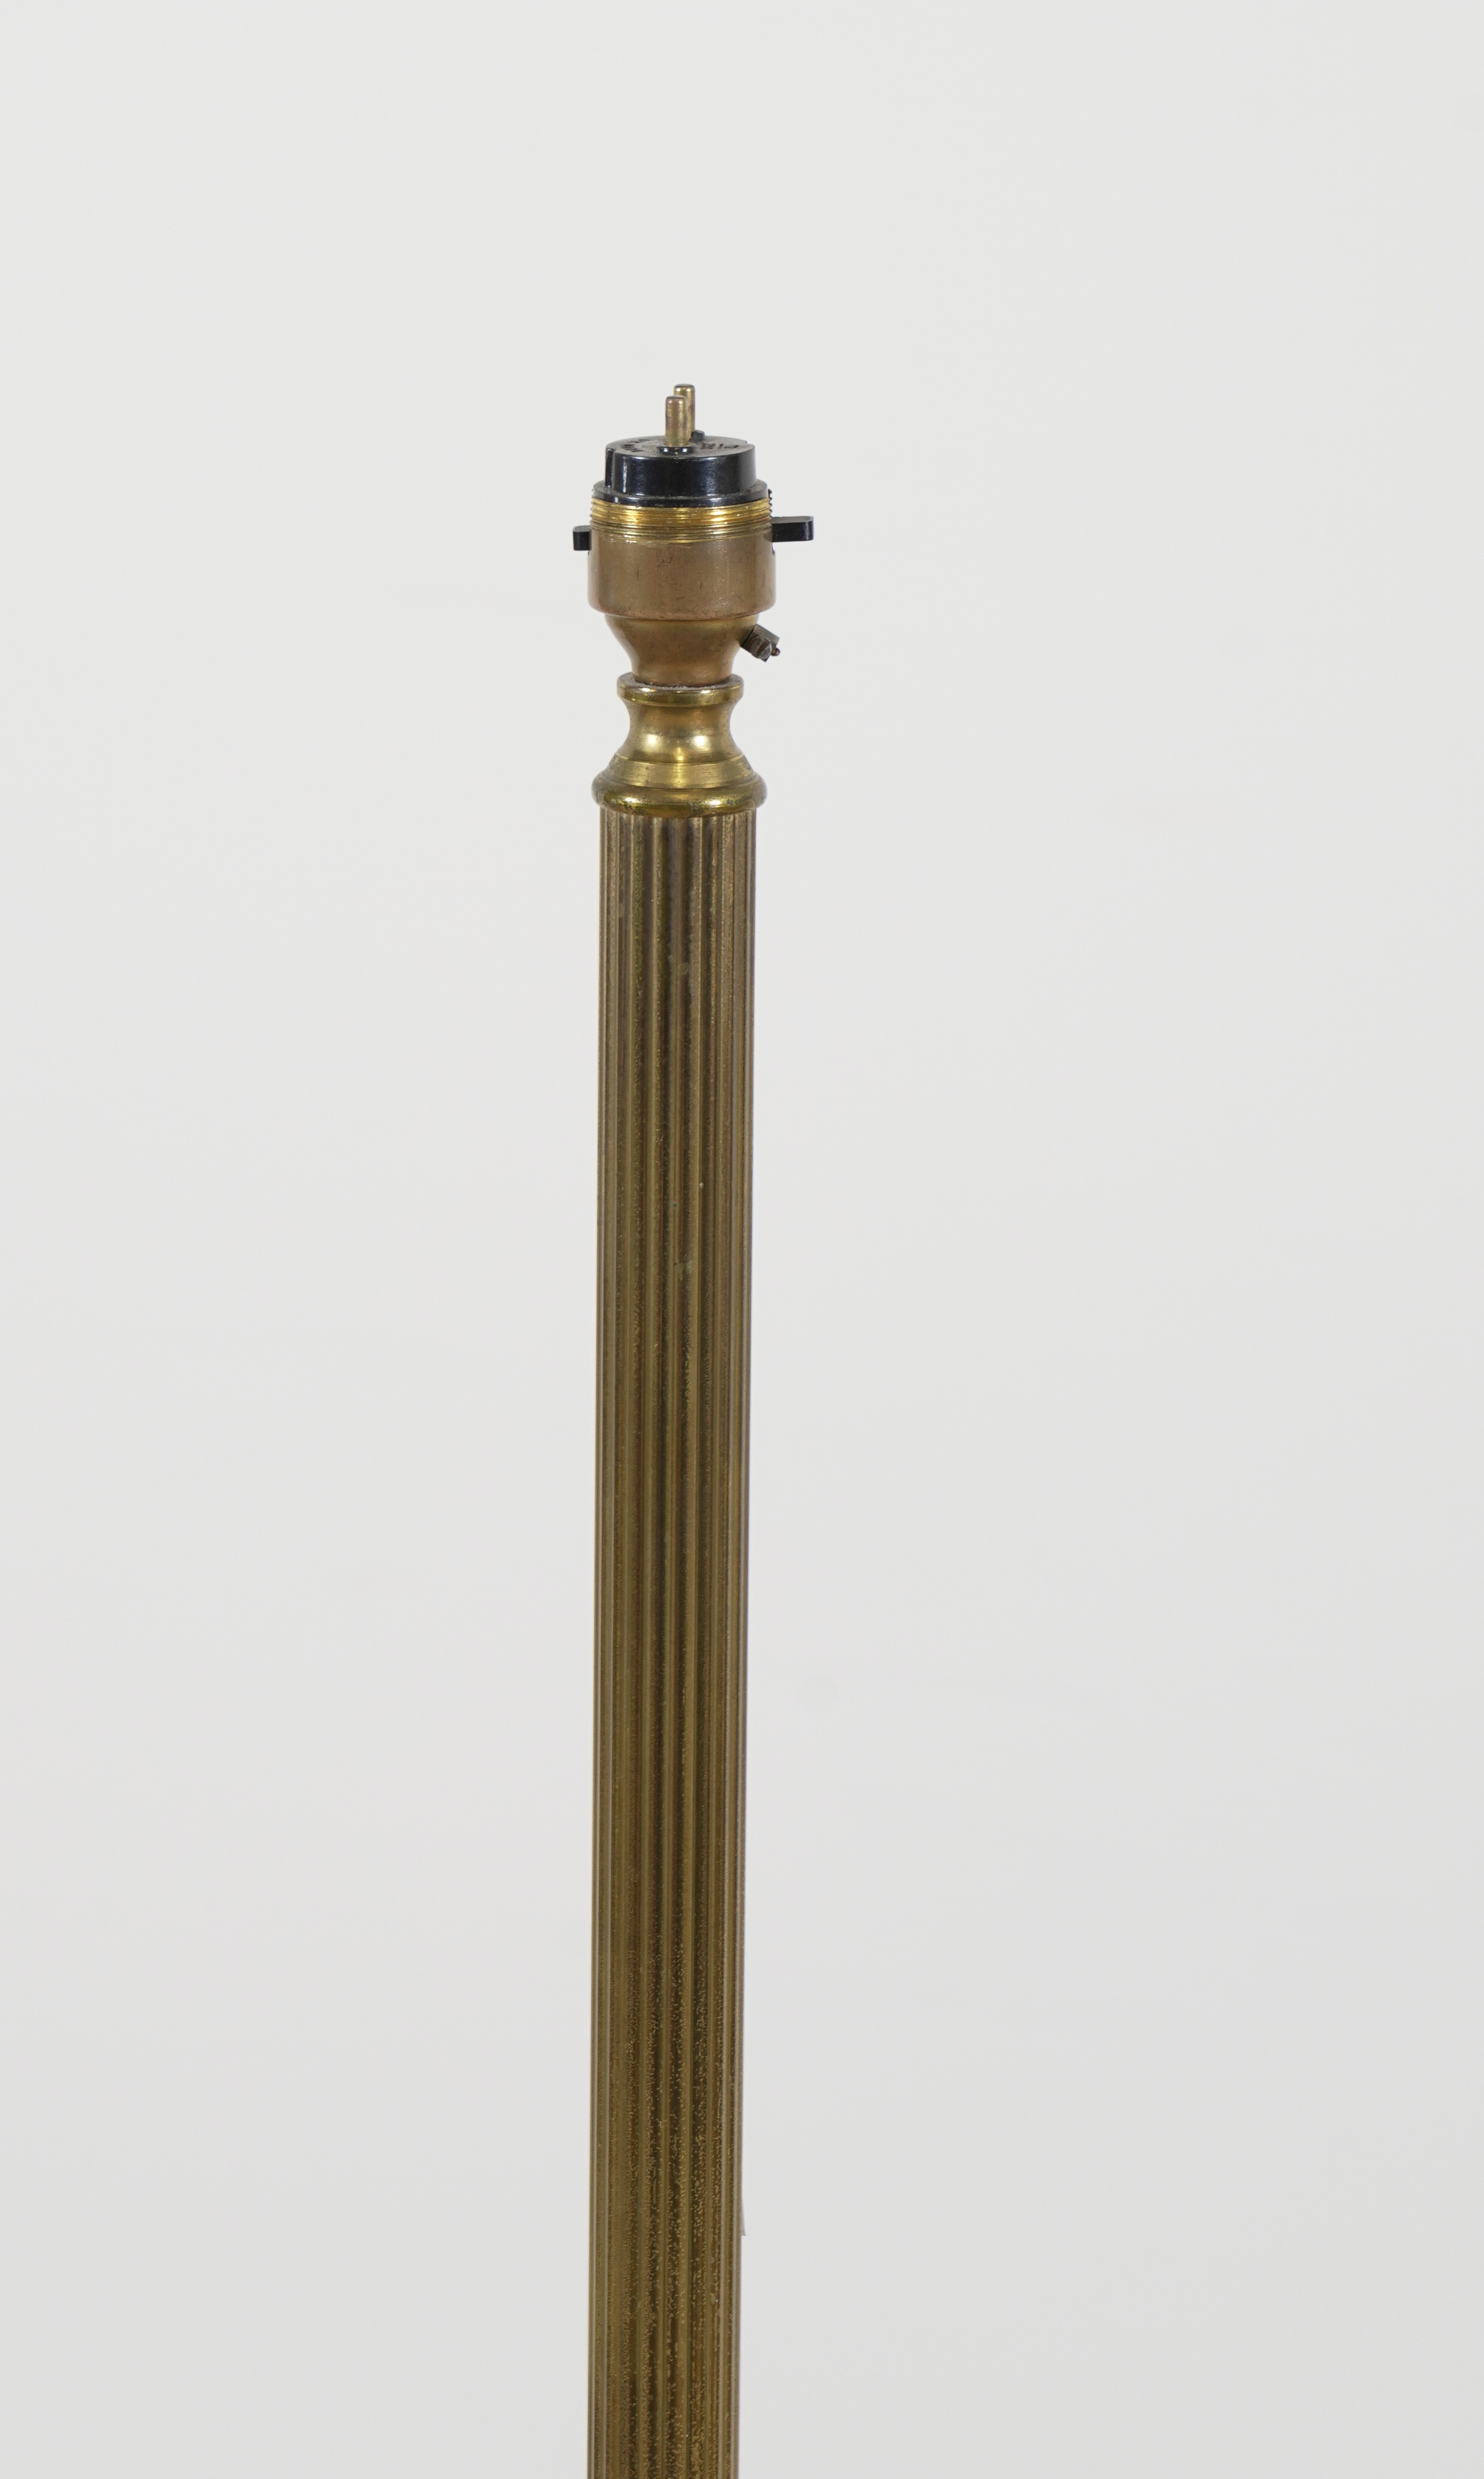 A PAIR OF BRASS FLUTED FLOOR STANDING LIGHTS (2) - Image 3 of 3